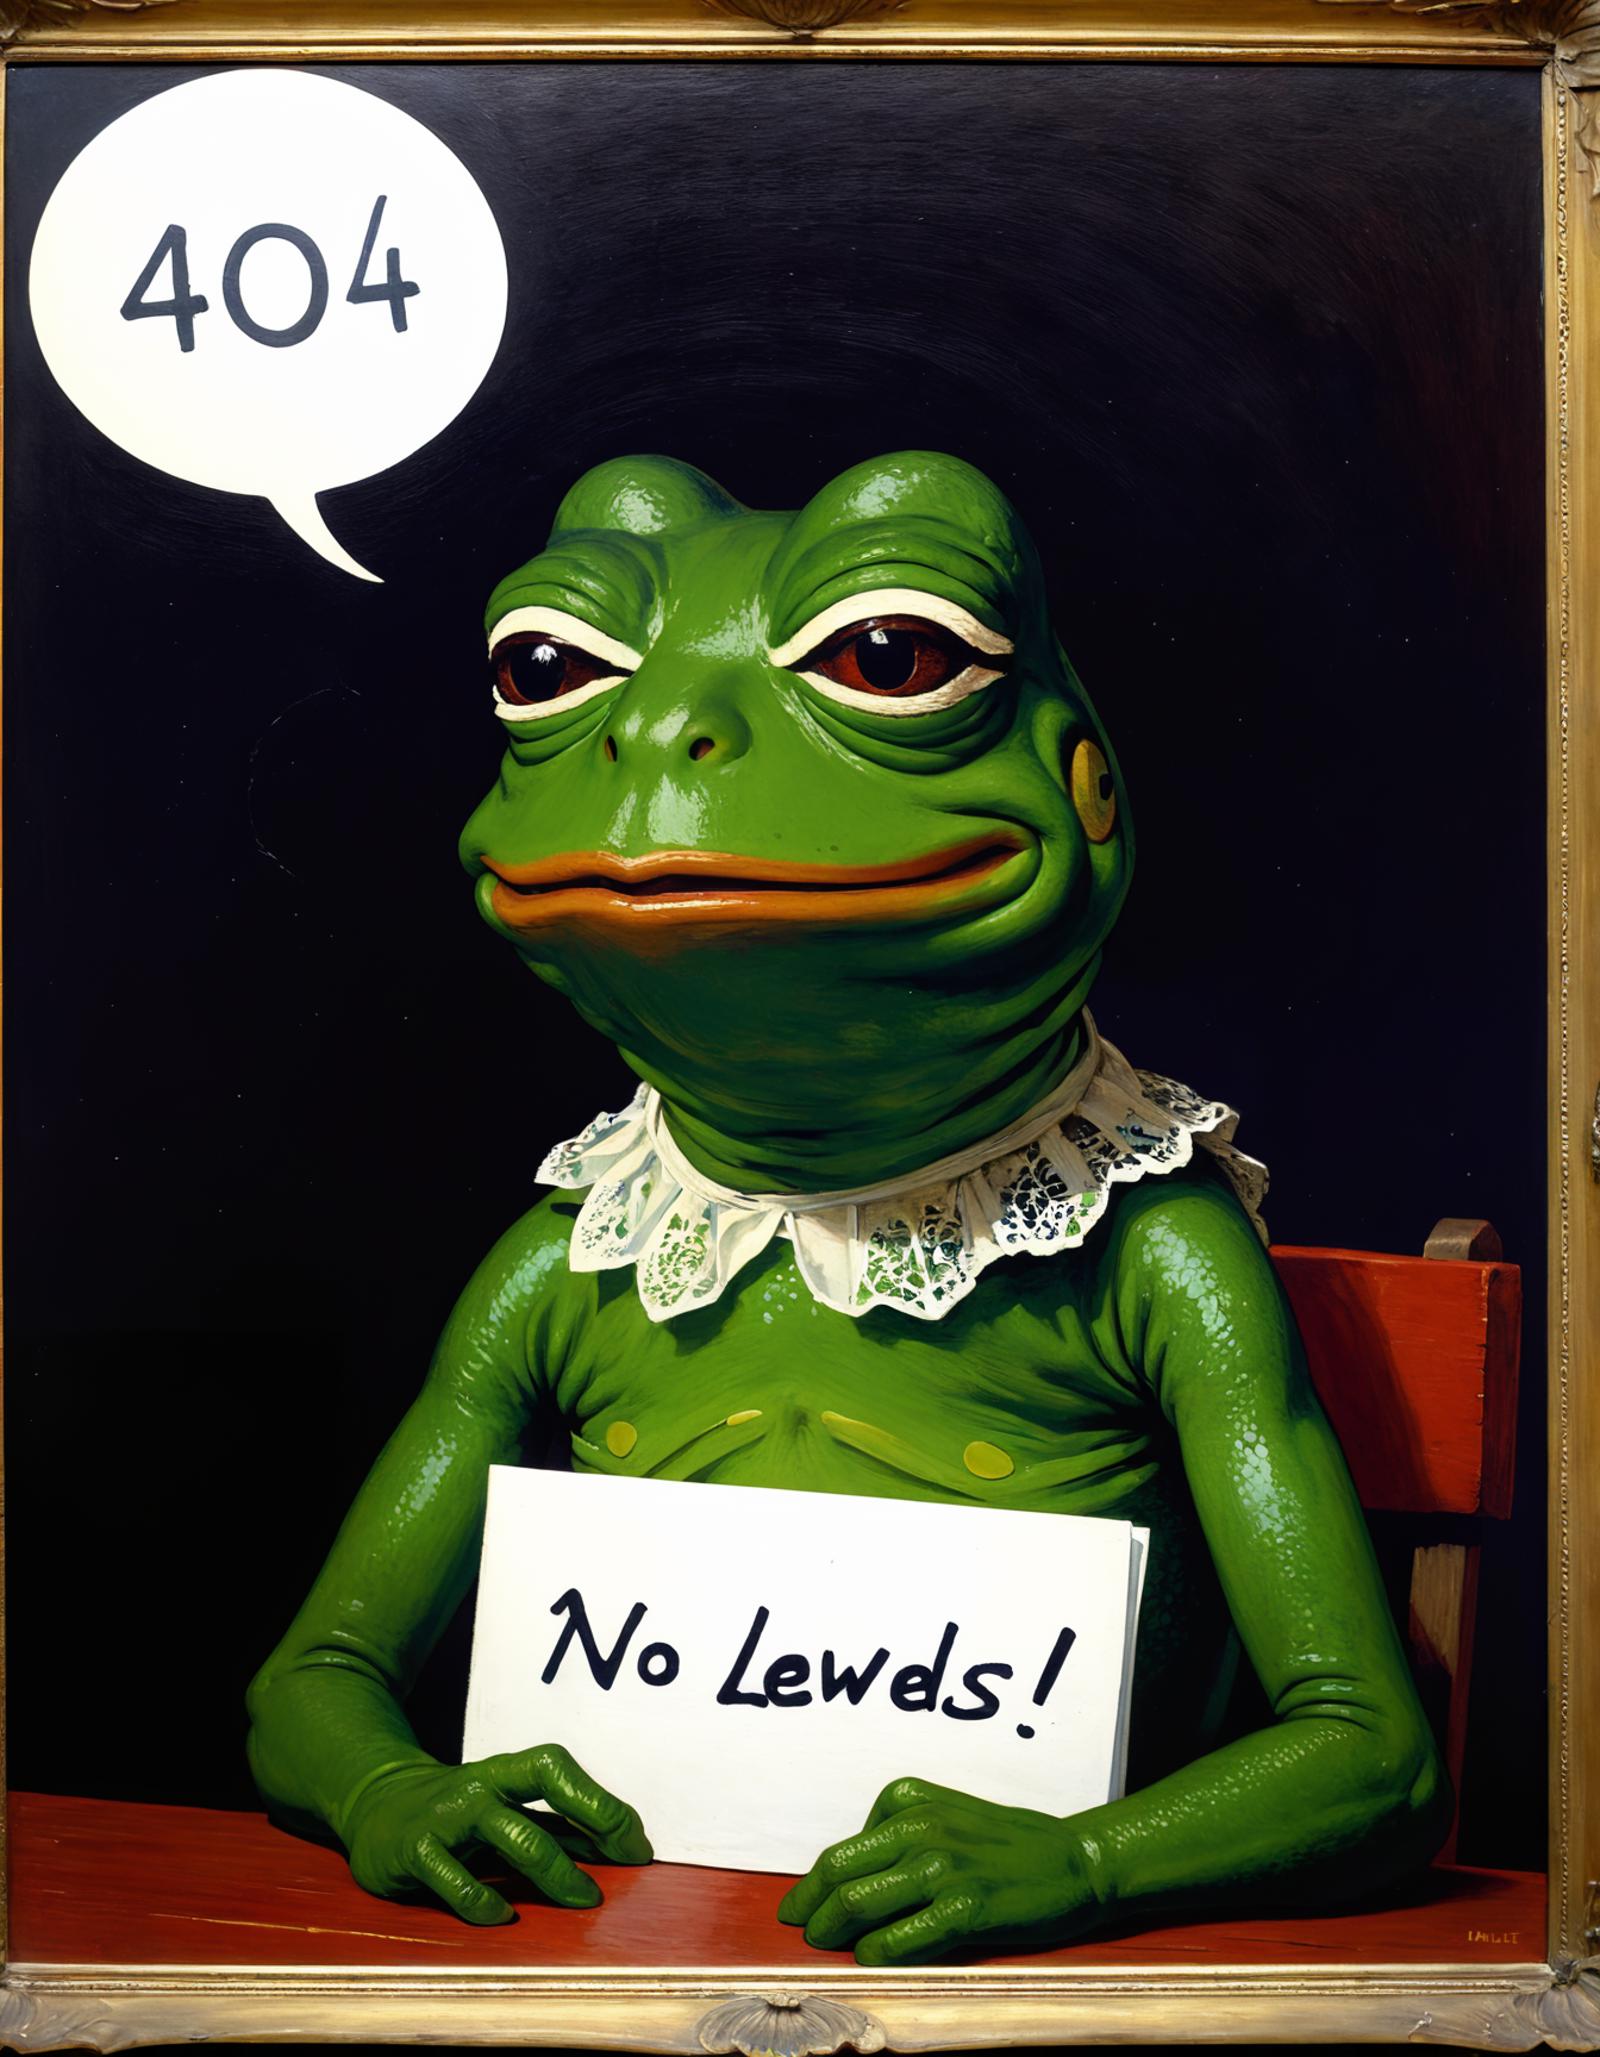 A frog is holding a sign that says "No Lewds!"